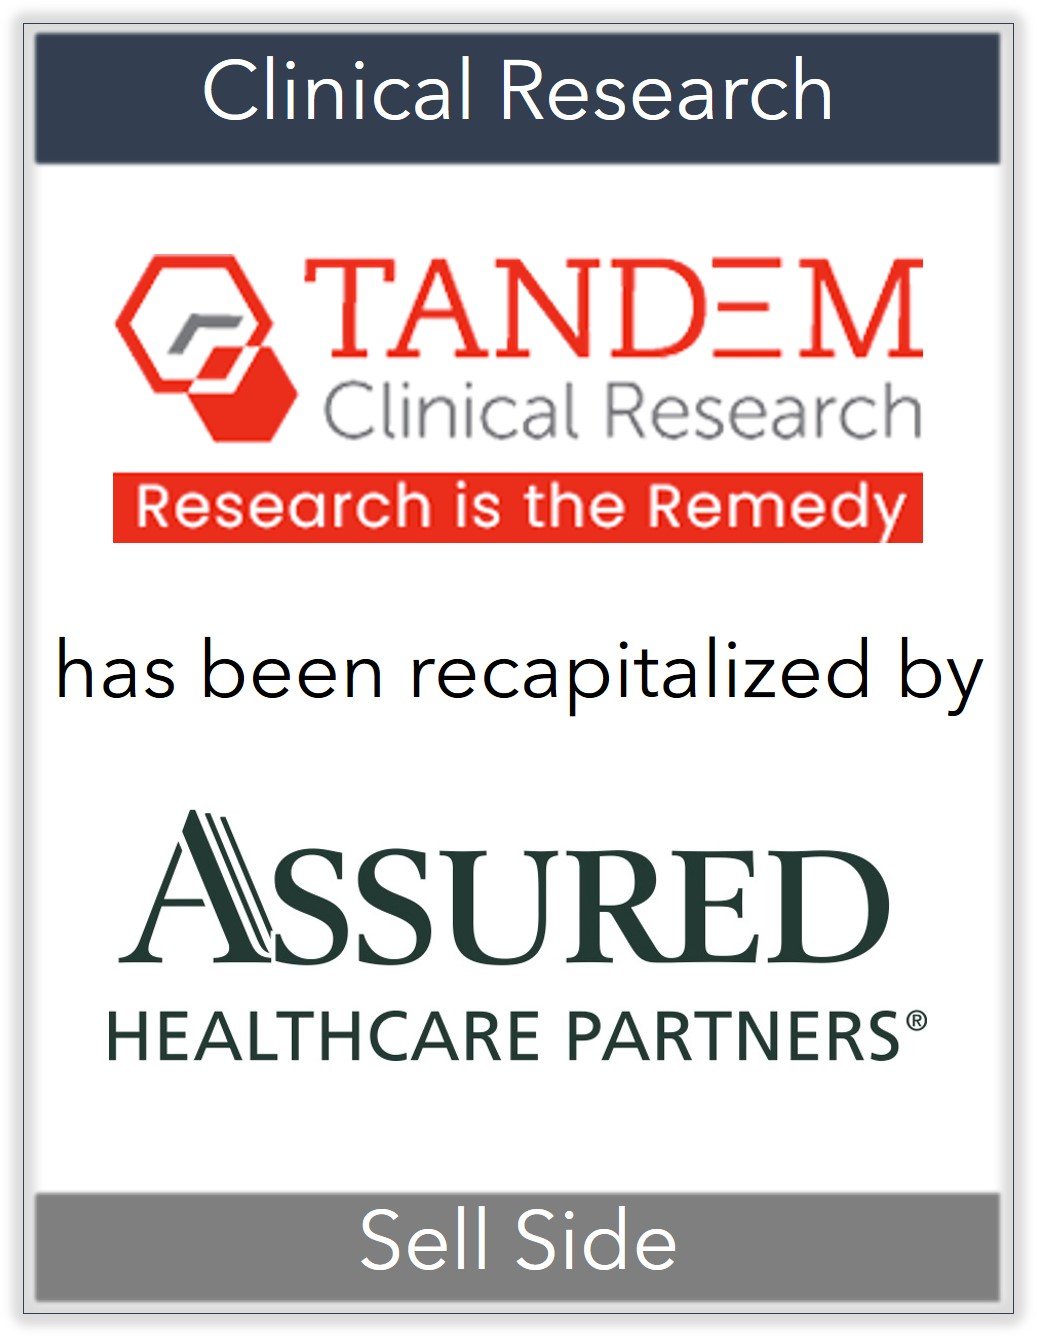 Tandem Clinical Research_Assured Healthcare Partners.jpg